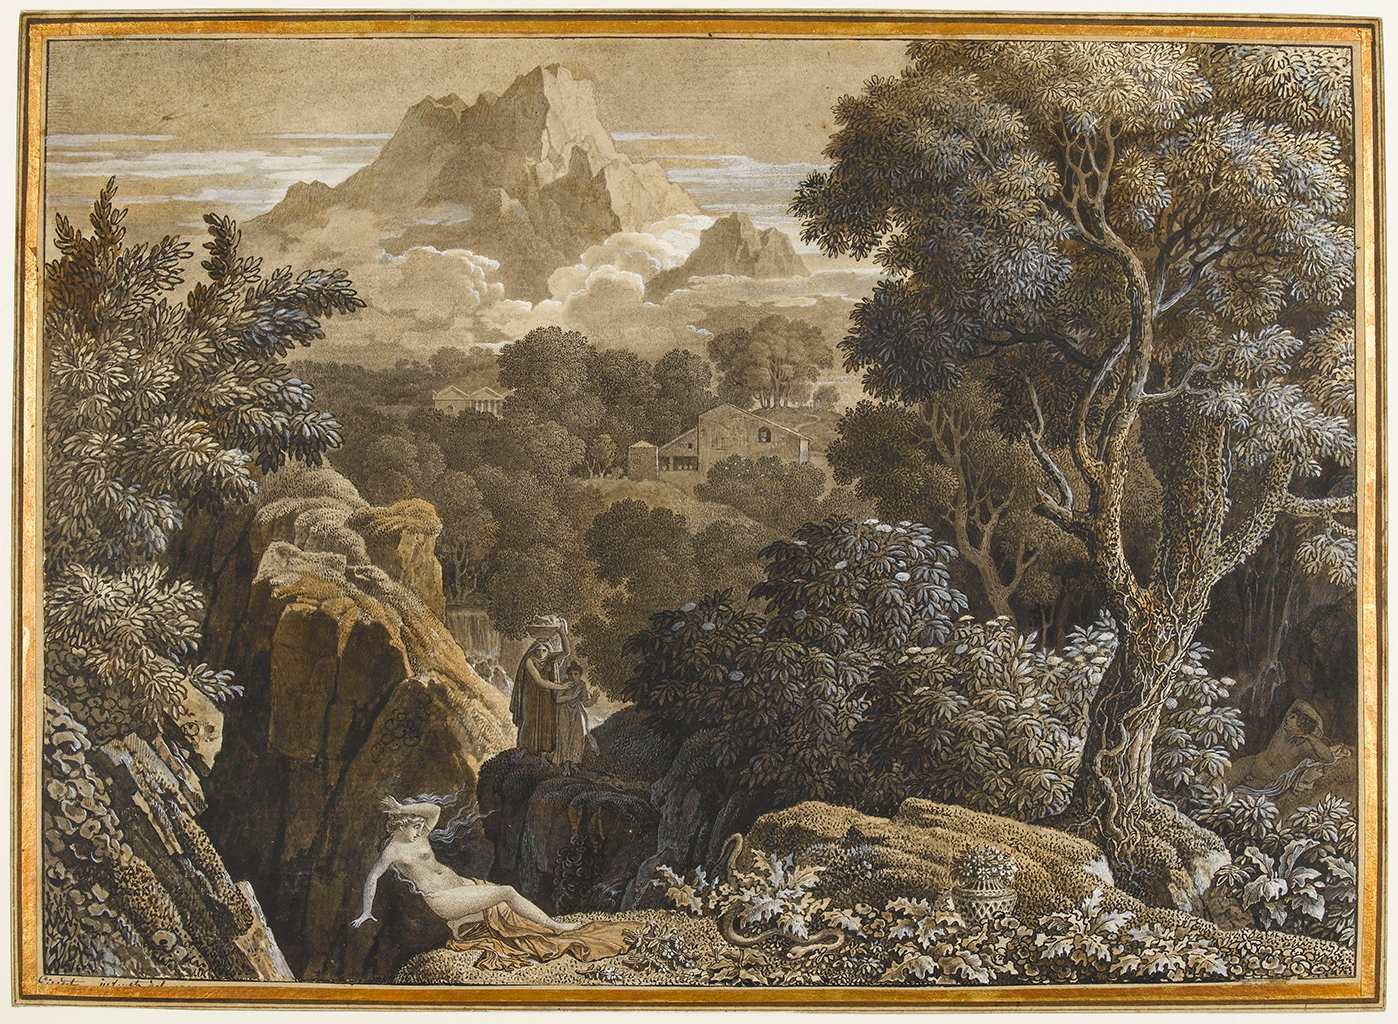 A print of a vast landscape depicting a forest with a large mountain surrounded by clouds in the background. In the foreground, there is a nude woman with her arm covering her face seemingly jumping away from a snake. The snake hides under the leaves of a plant near a vase. To the right are rocks with moss on them near a tree.